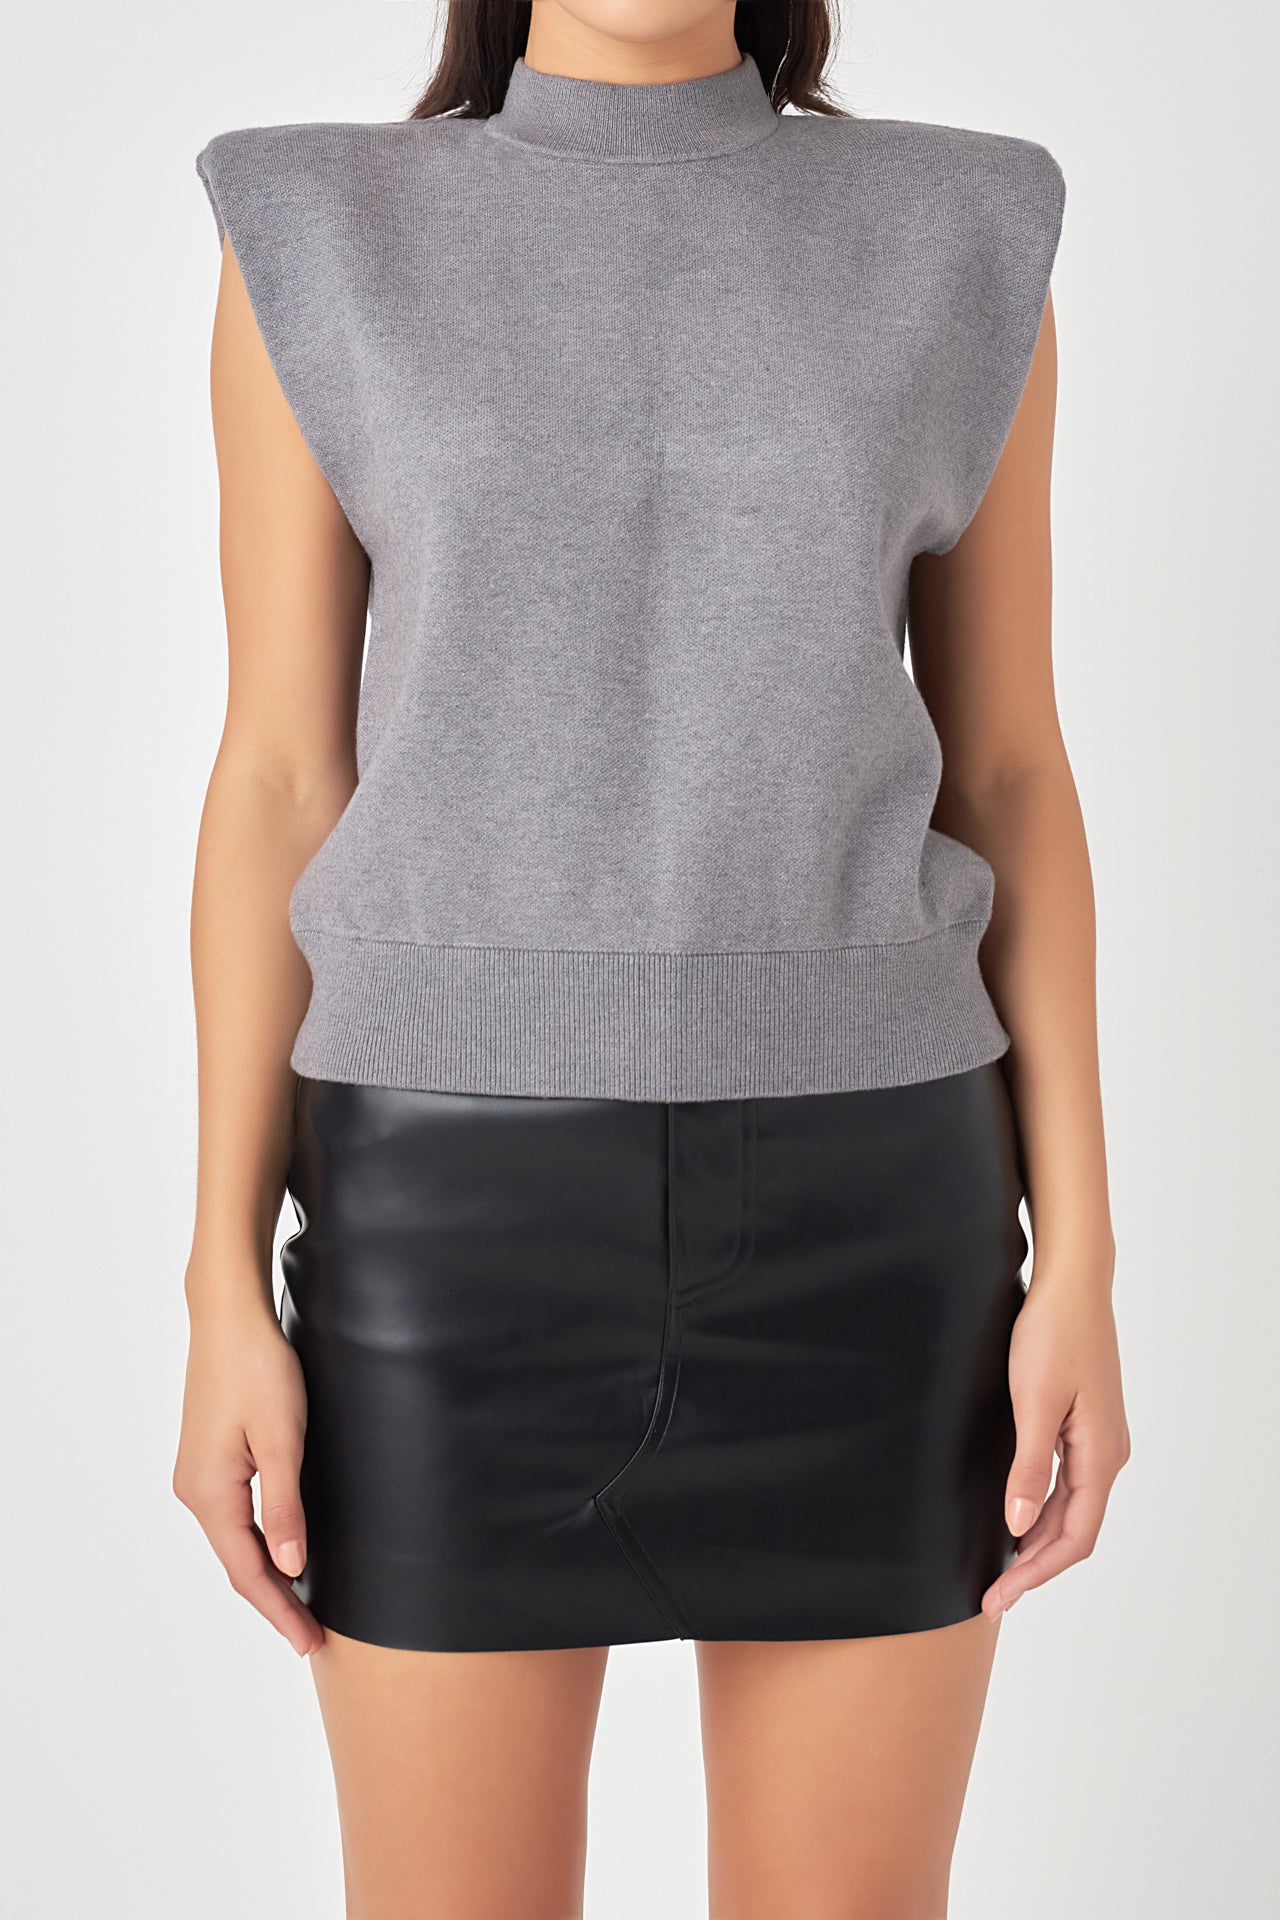 GREY LAB-Mock Neck Sleeveless Knit Top-SWEATERS & KNITS available at Objectrare